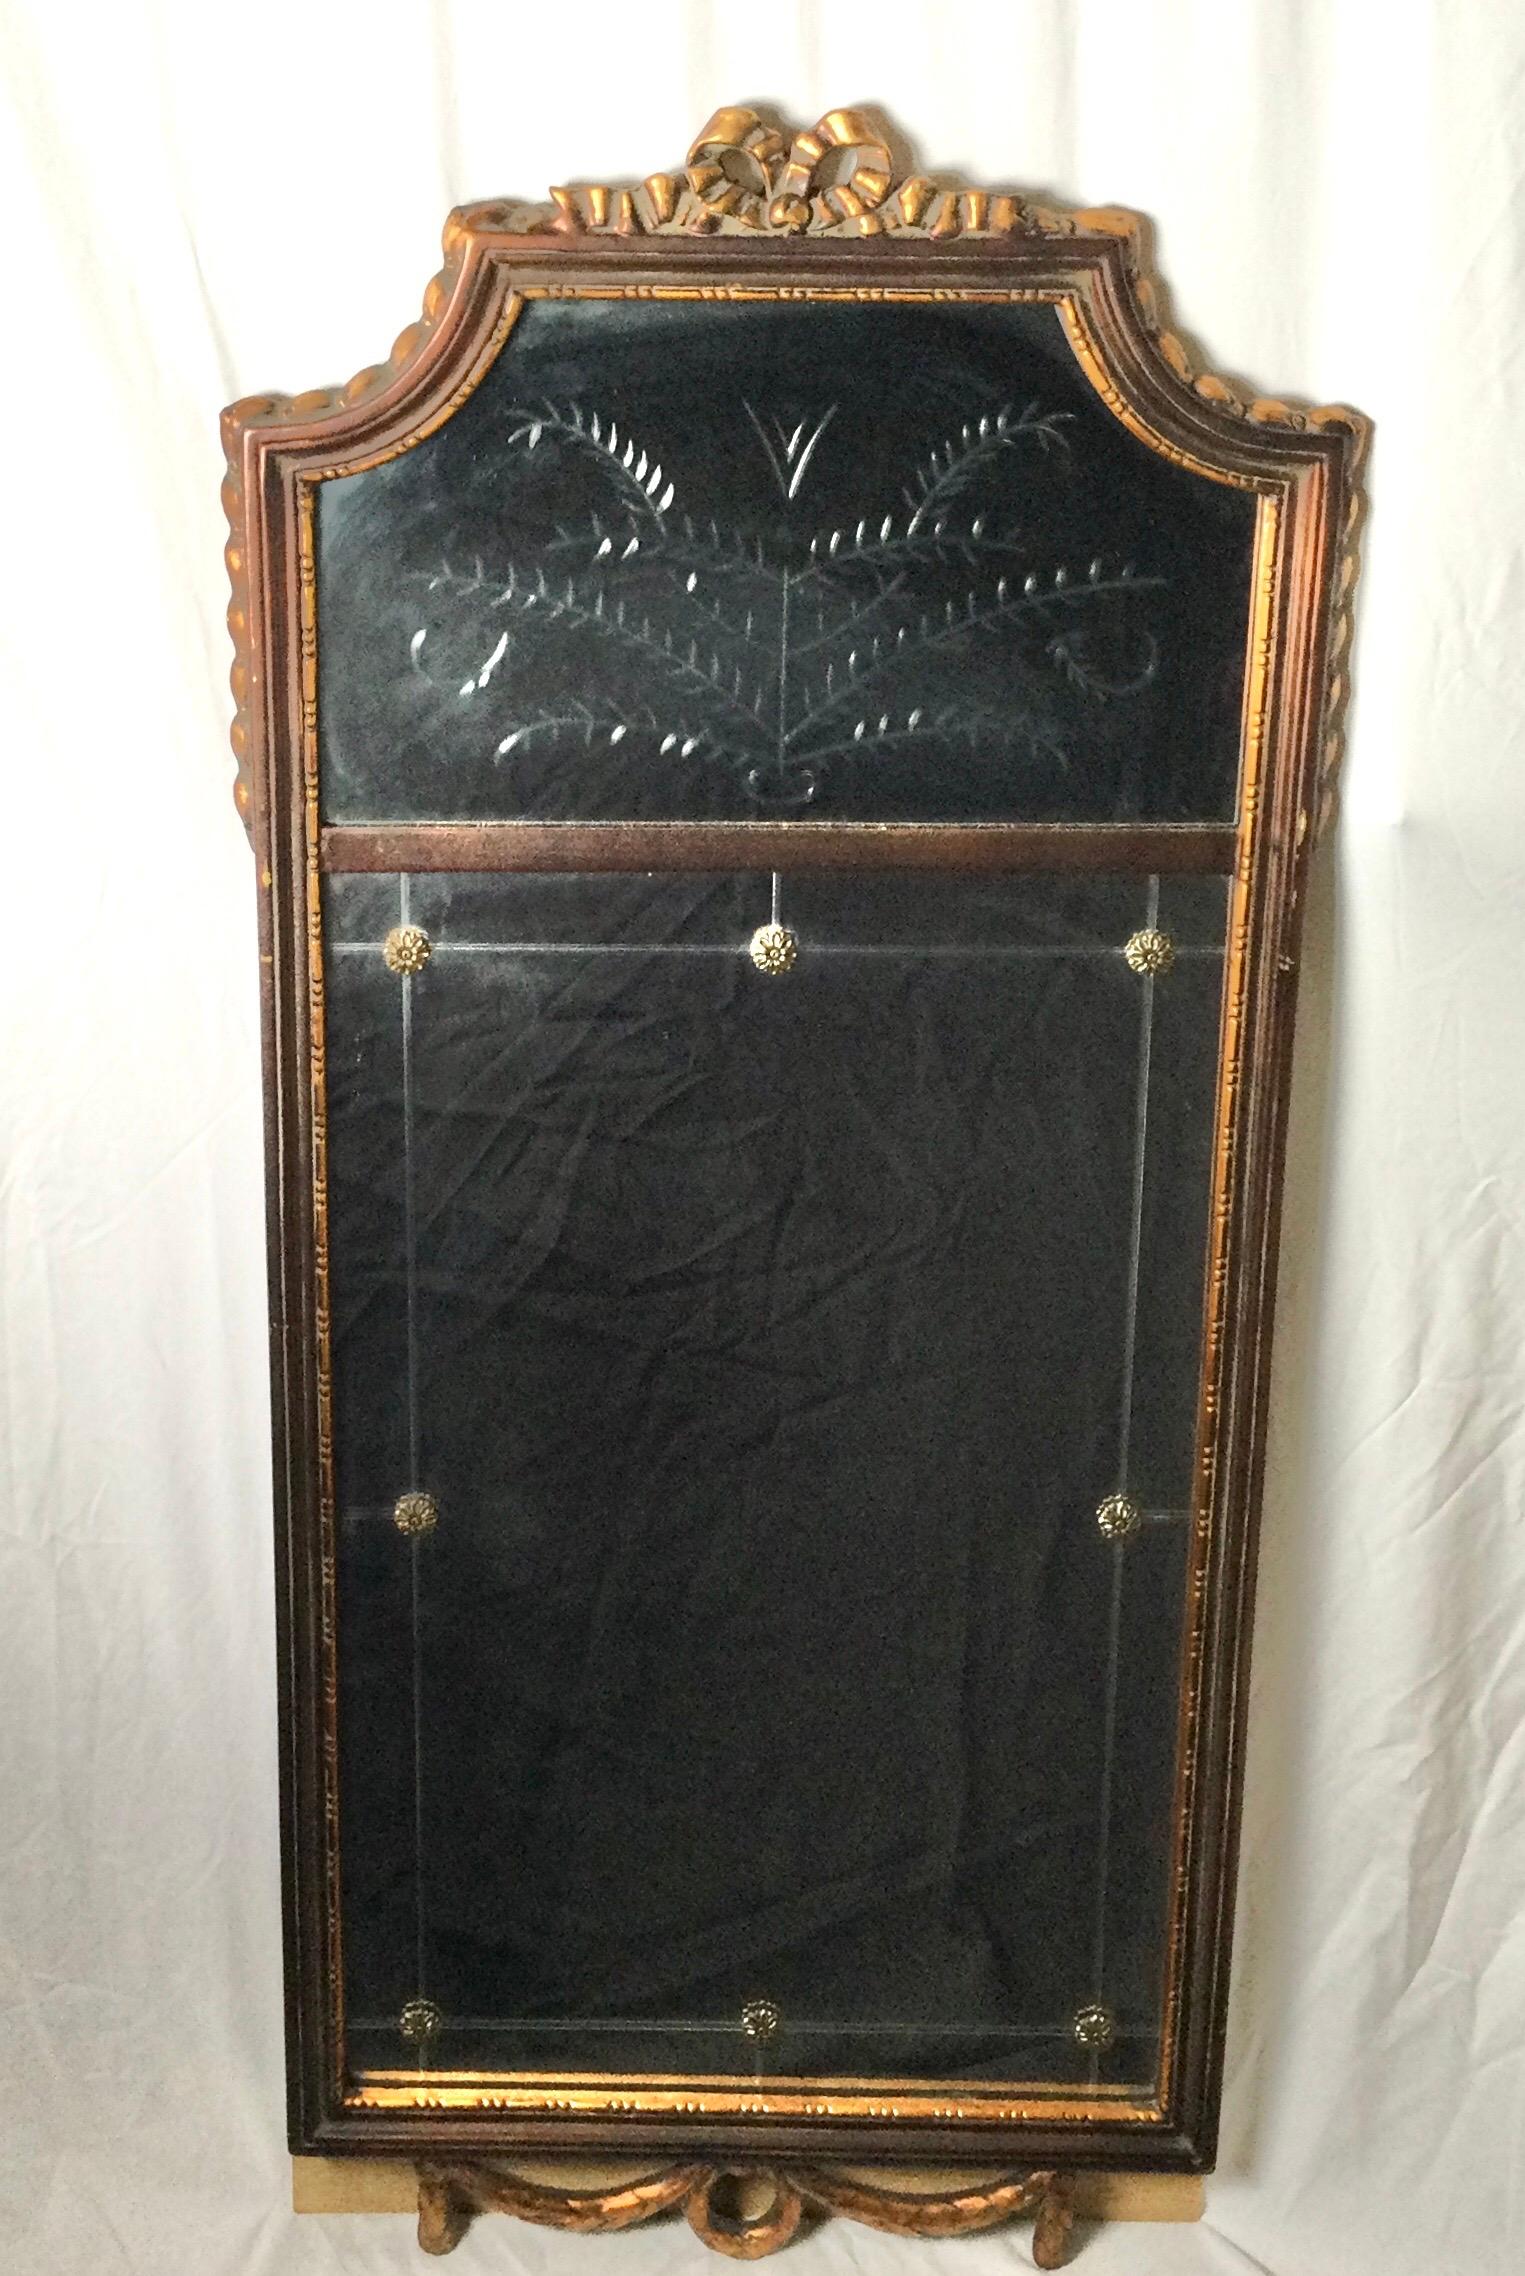 20th Century Gilt wood mirror with Etched Design.